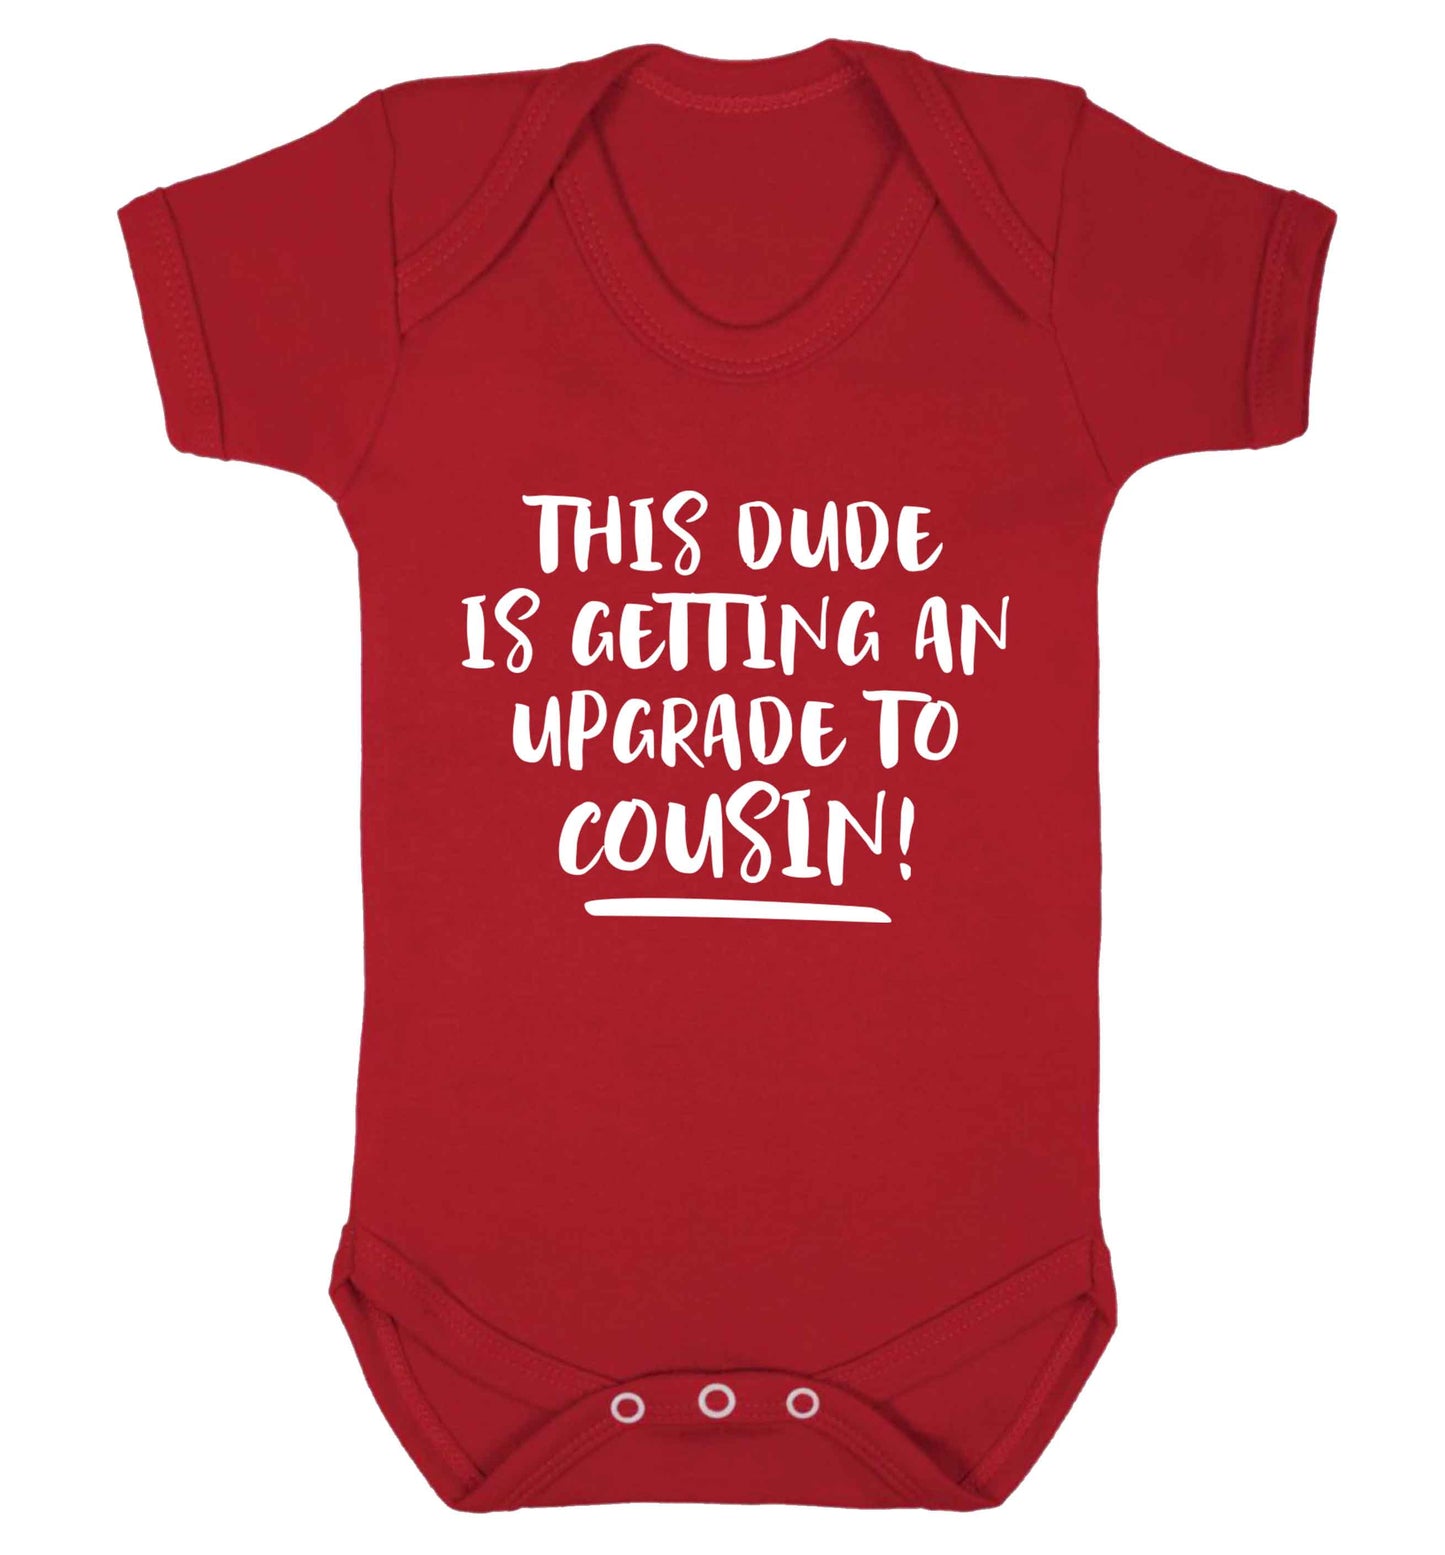 This dude is getting an upgrade to cousin! Baby Vest red 18-24 months